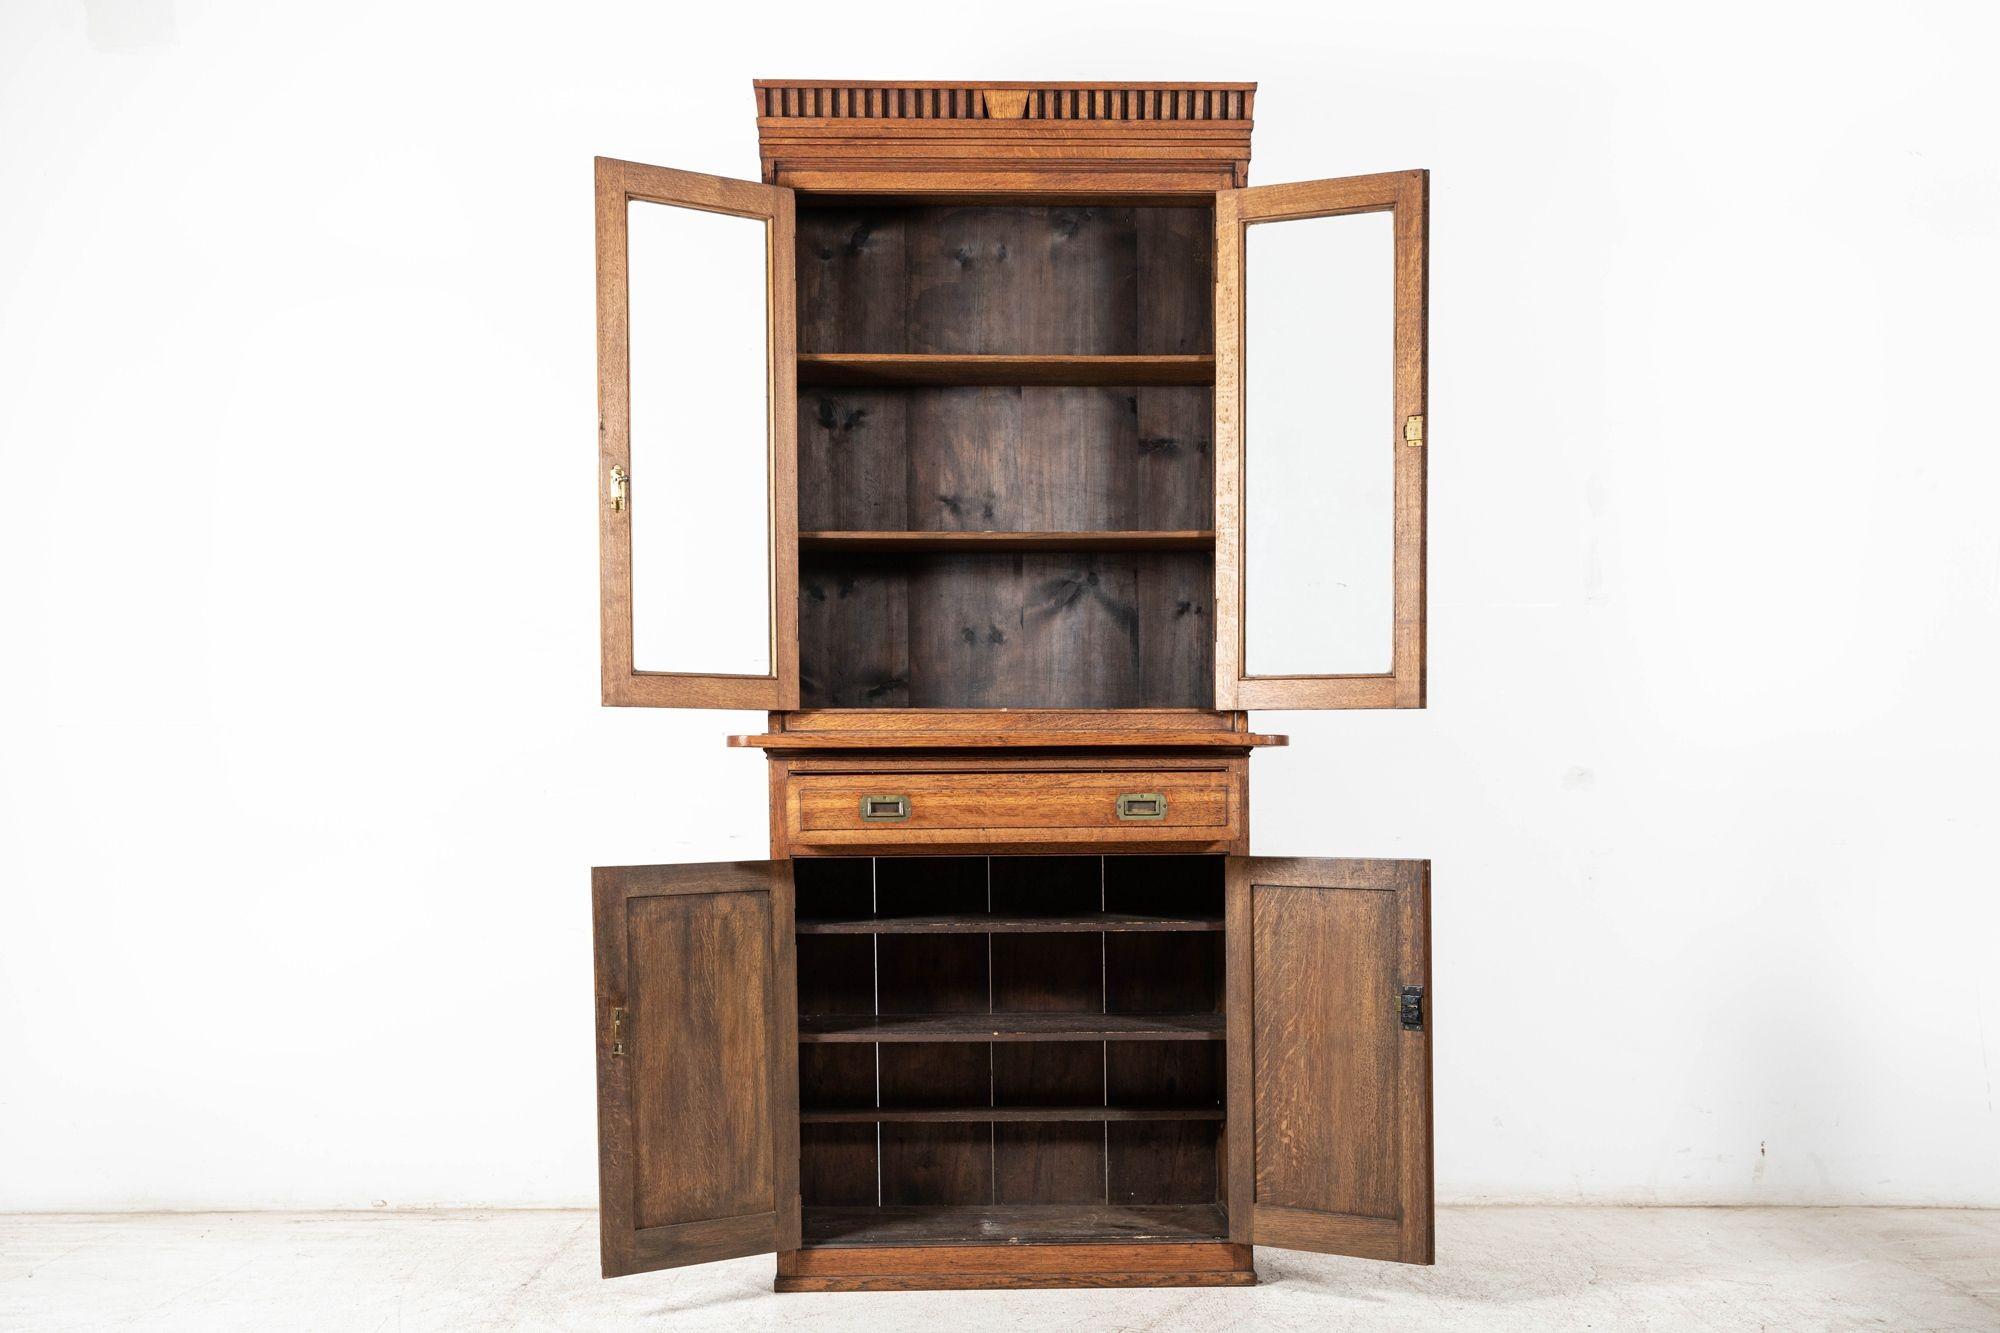 Circa 1890

19th C English oak estate bookcase cabinet. Excellent quality, colour and form with original hardware, locks and keys.

sku 1007

Measures: W 102 x D 42 x H 217 cm
Base W 102 x D 42 x H 101 cm
Top W 90 x D 33 x H 116 cm.